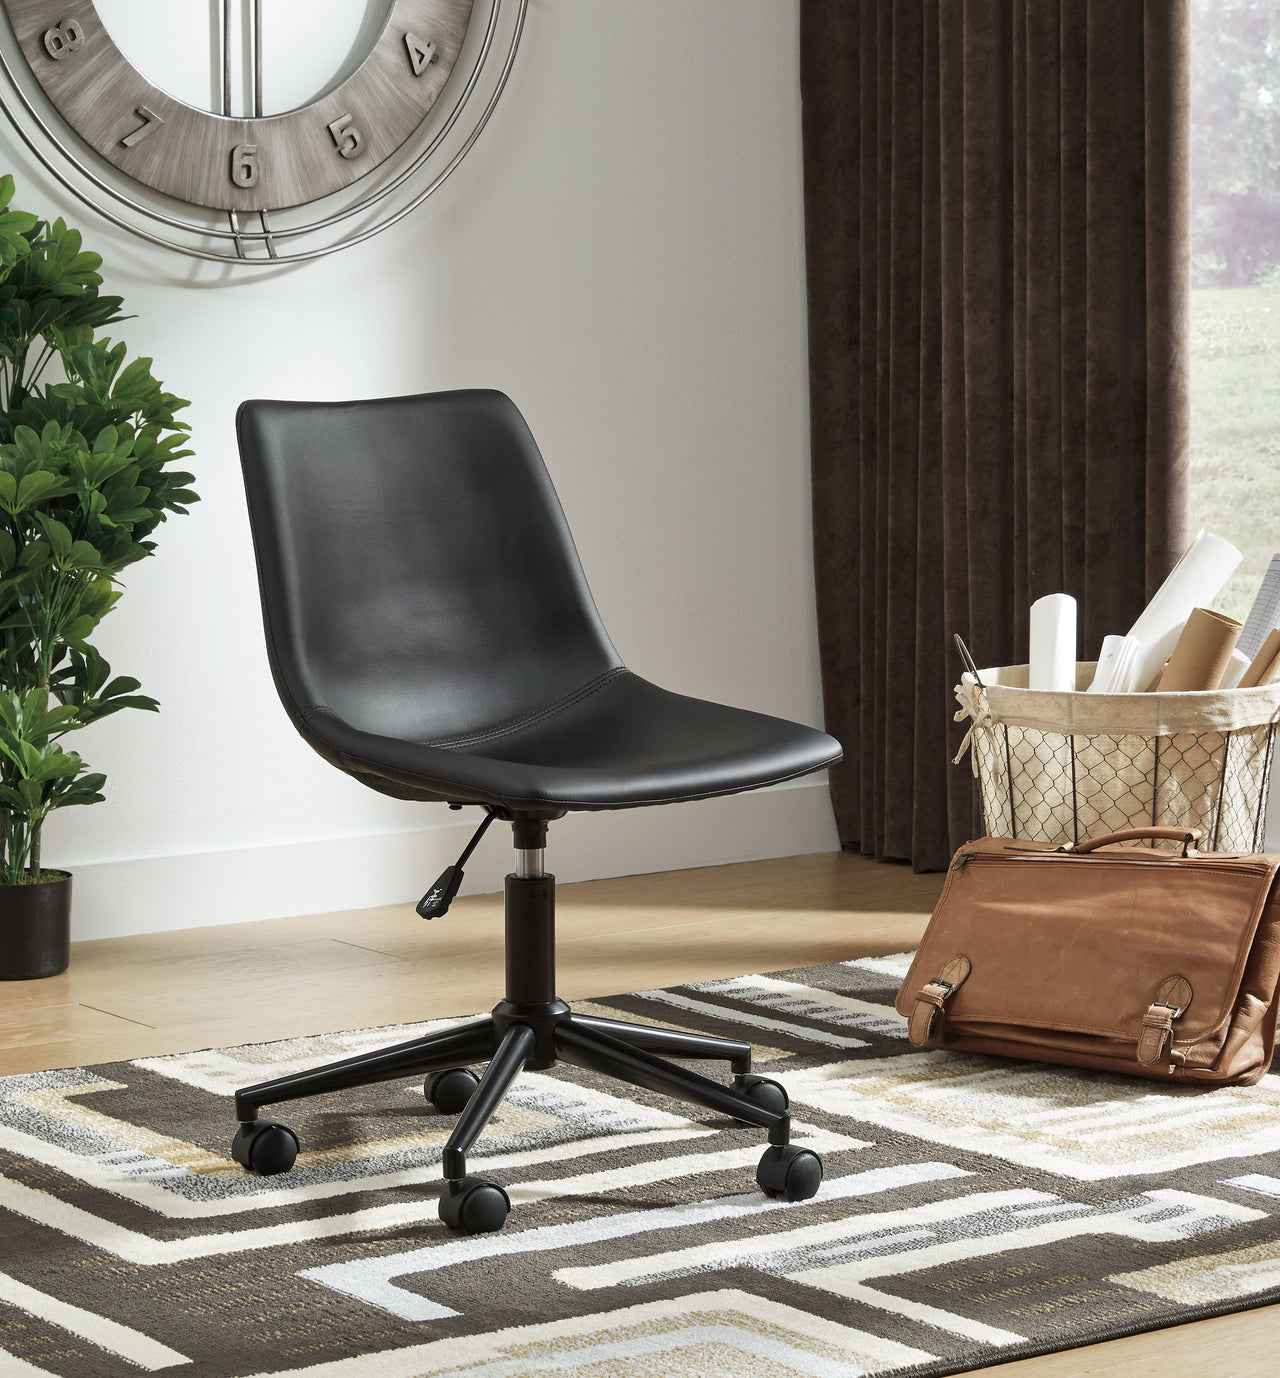 Arlenbry - L-Desk With Storage, Bookcase, Swivel Desk Chair - Tony's Home Furnishings